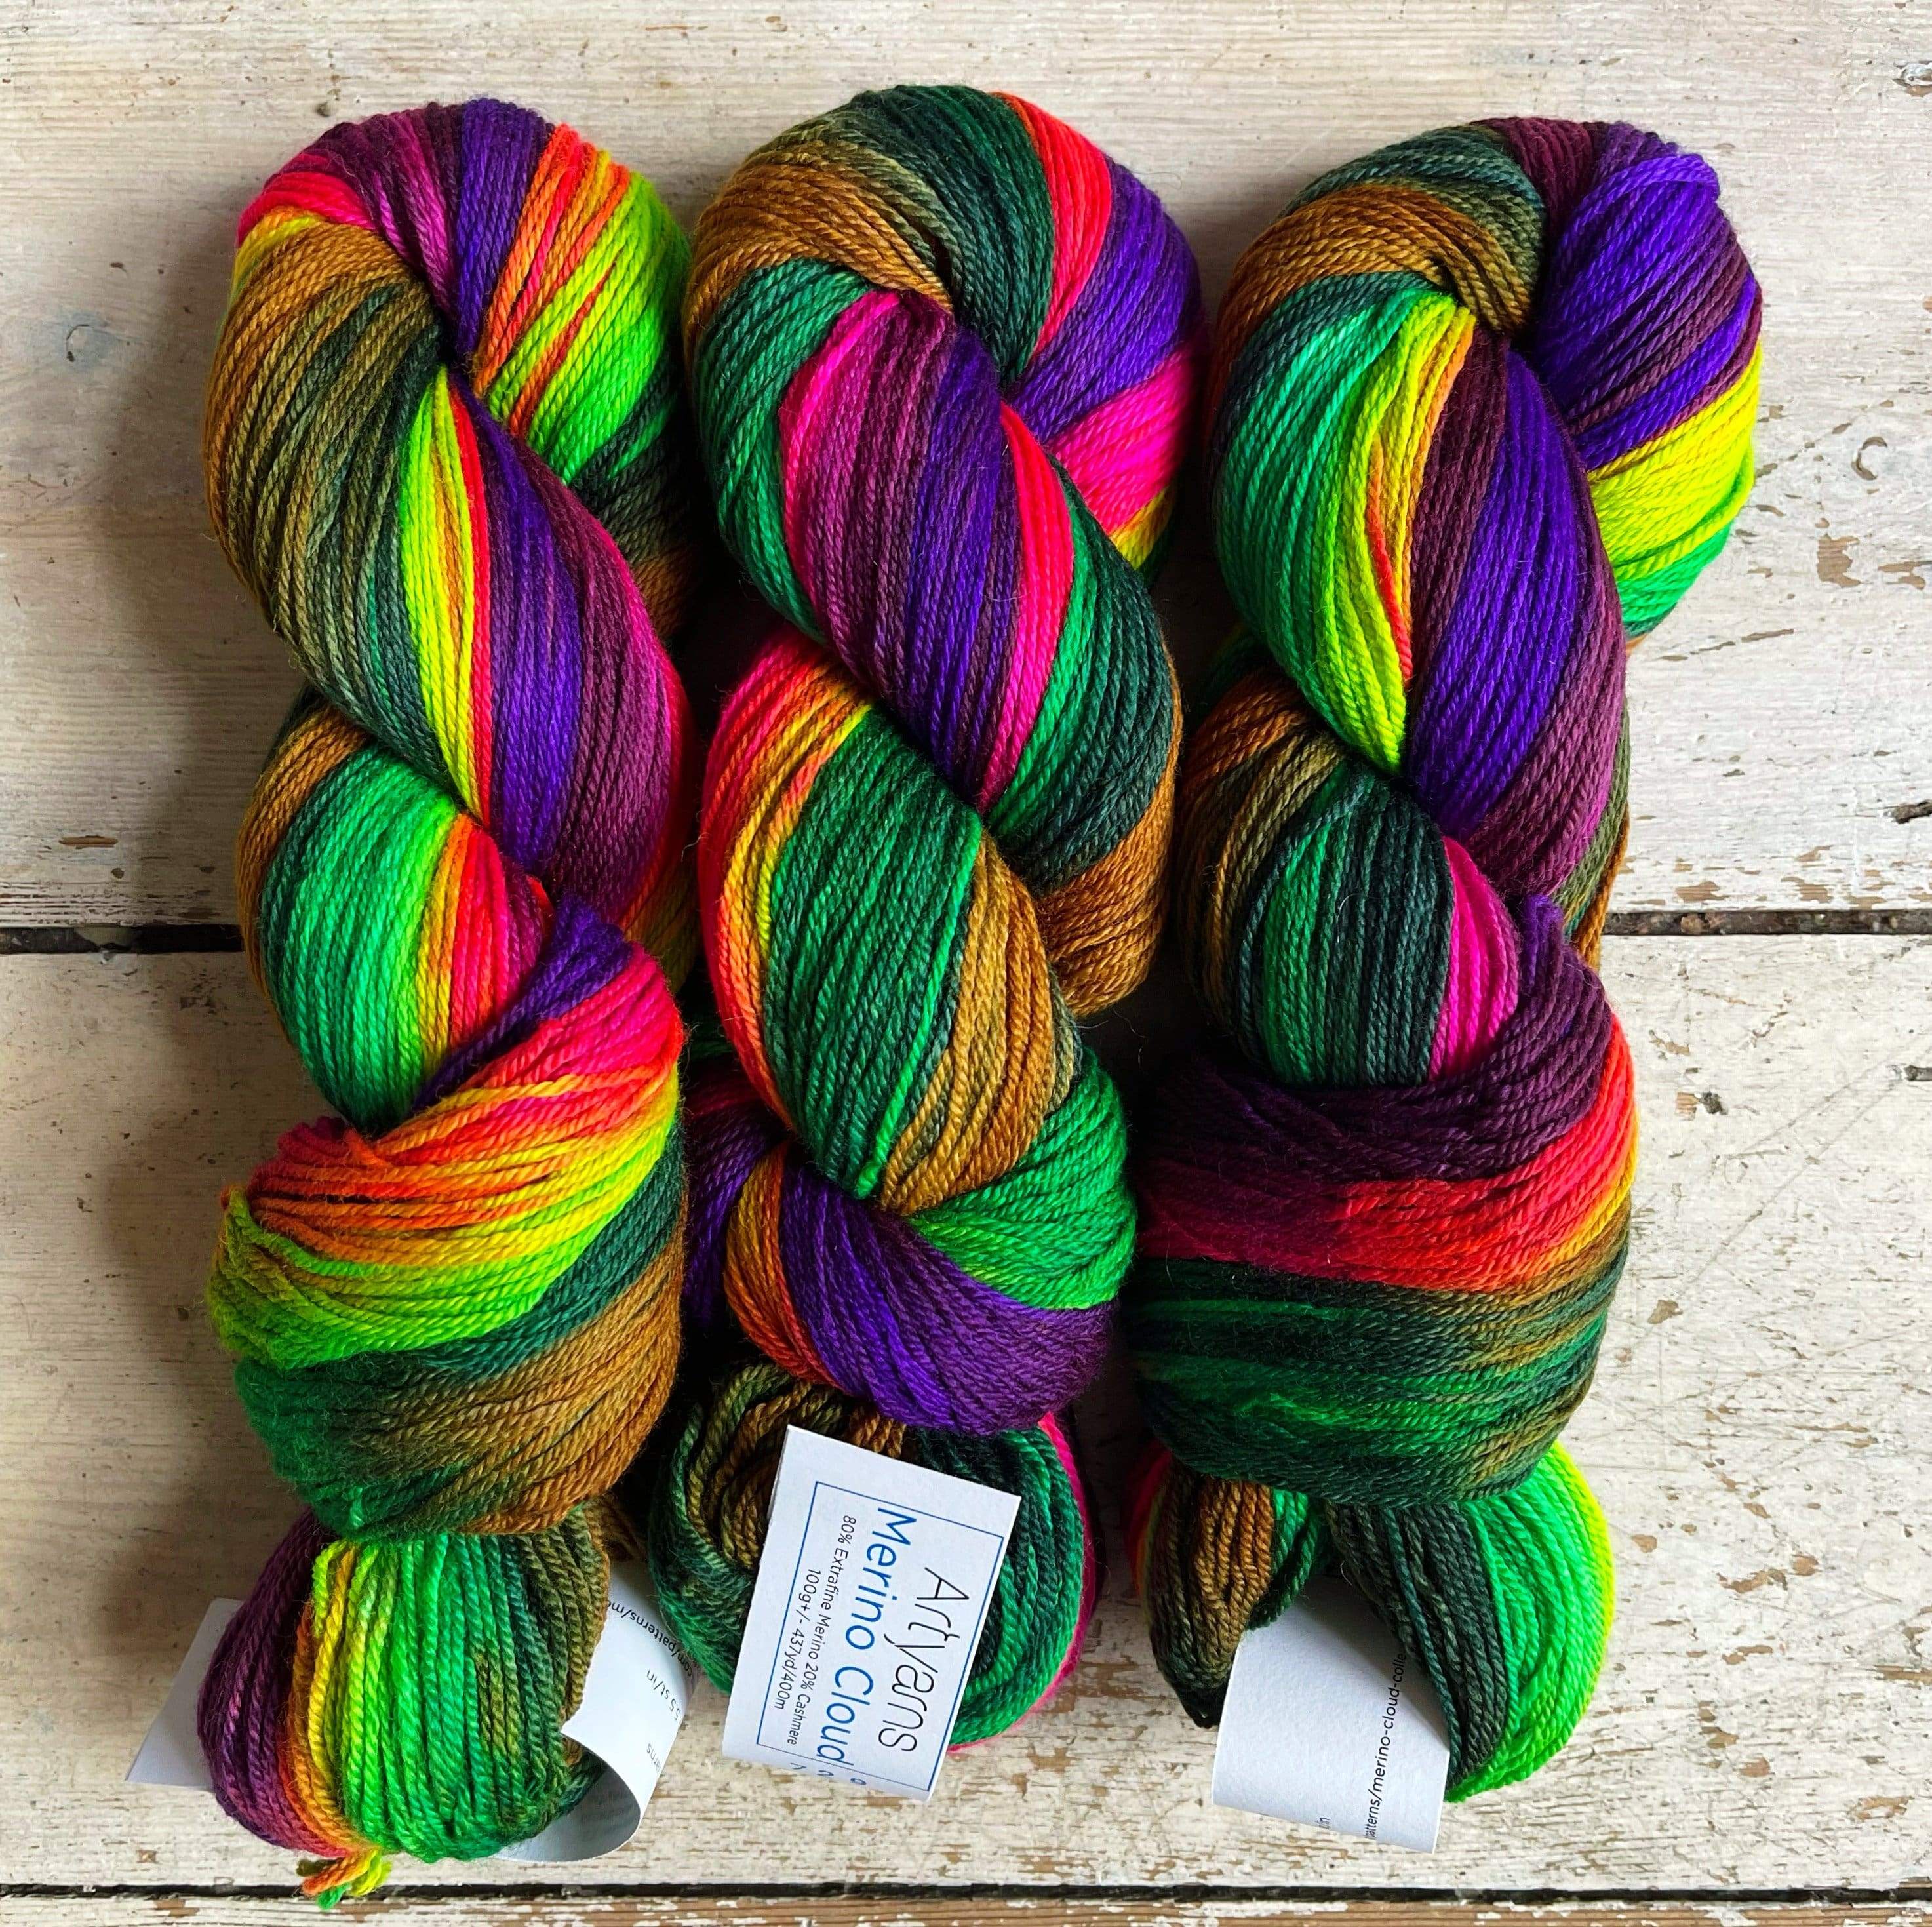 Artyarns Merino Cloud Ombre Yarn in 737 Electric Rainbow Ombre at